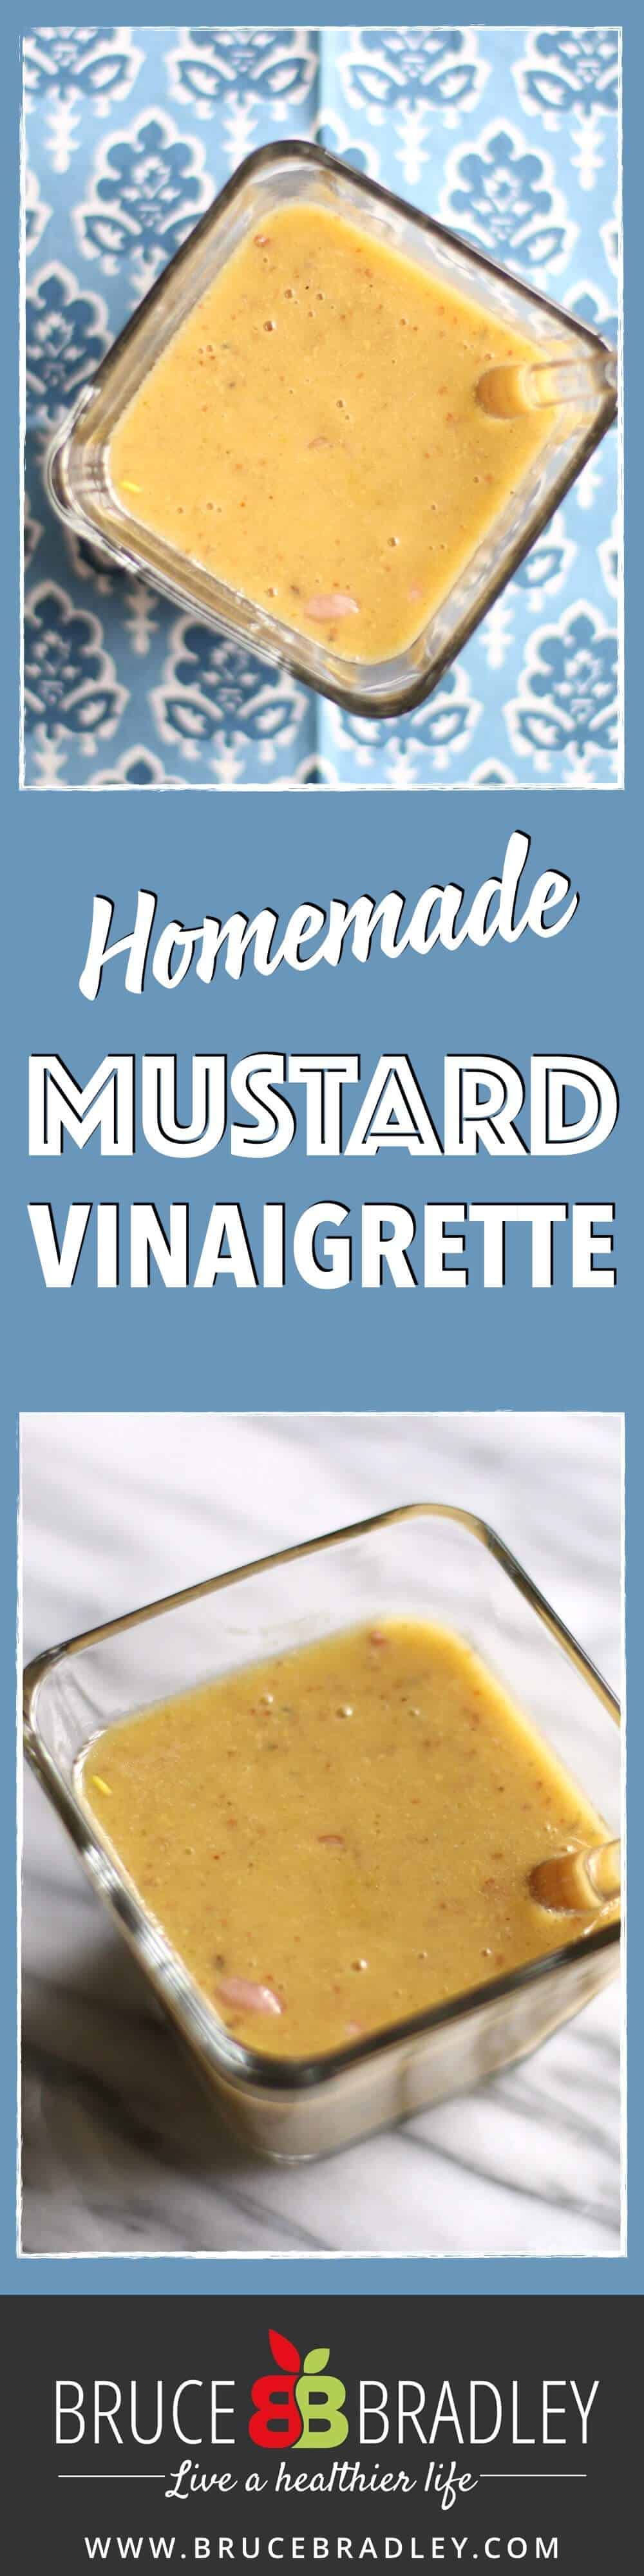 Looking For A New Salad Dressing? This Mustard Vinaigrette Is A Delicious Dressing That Packs A Flavorful Punch On Any Salad!